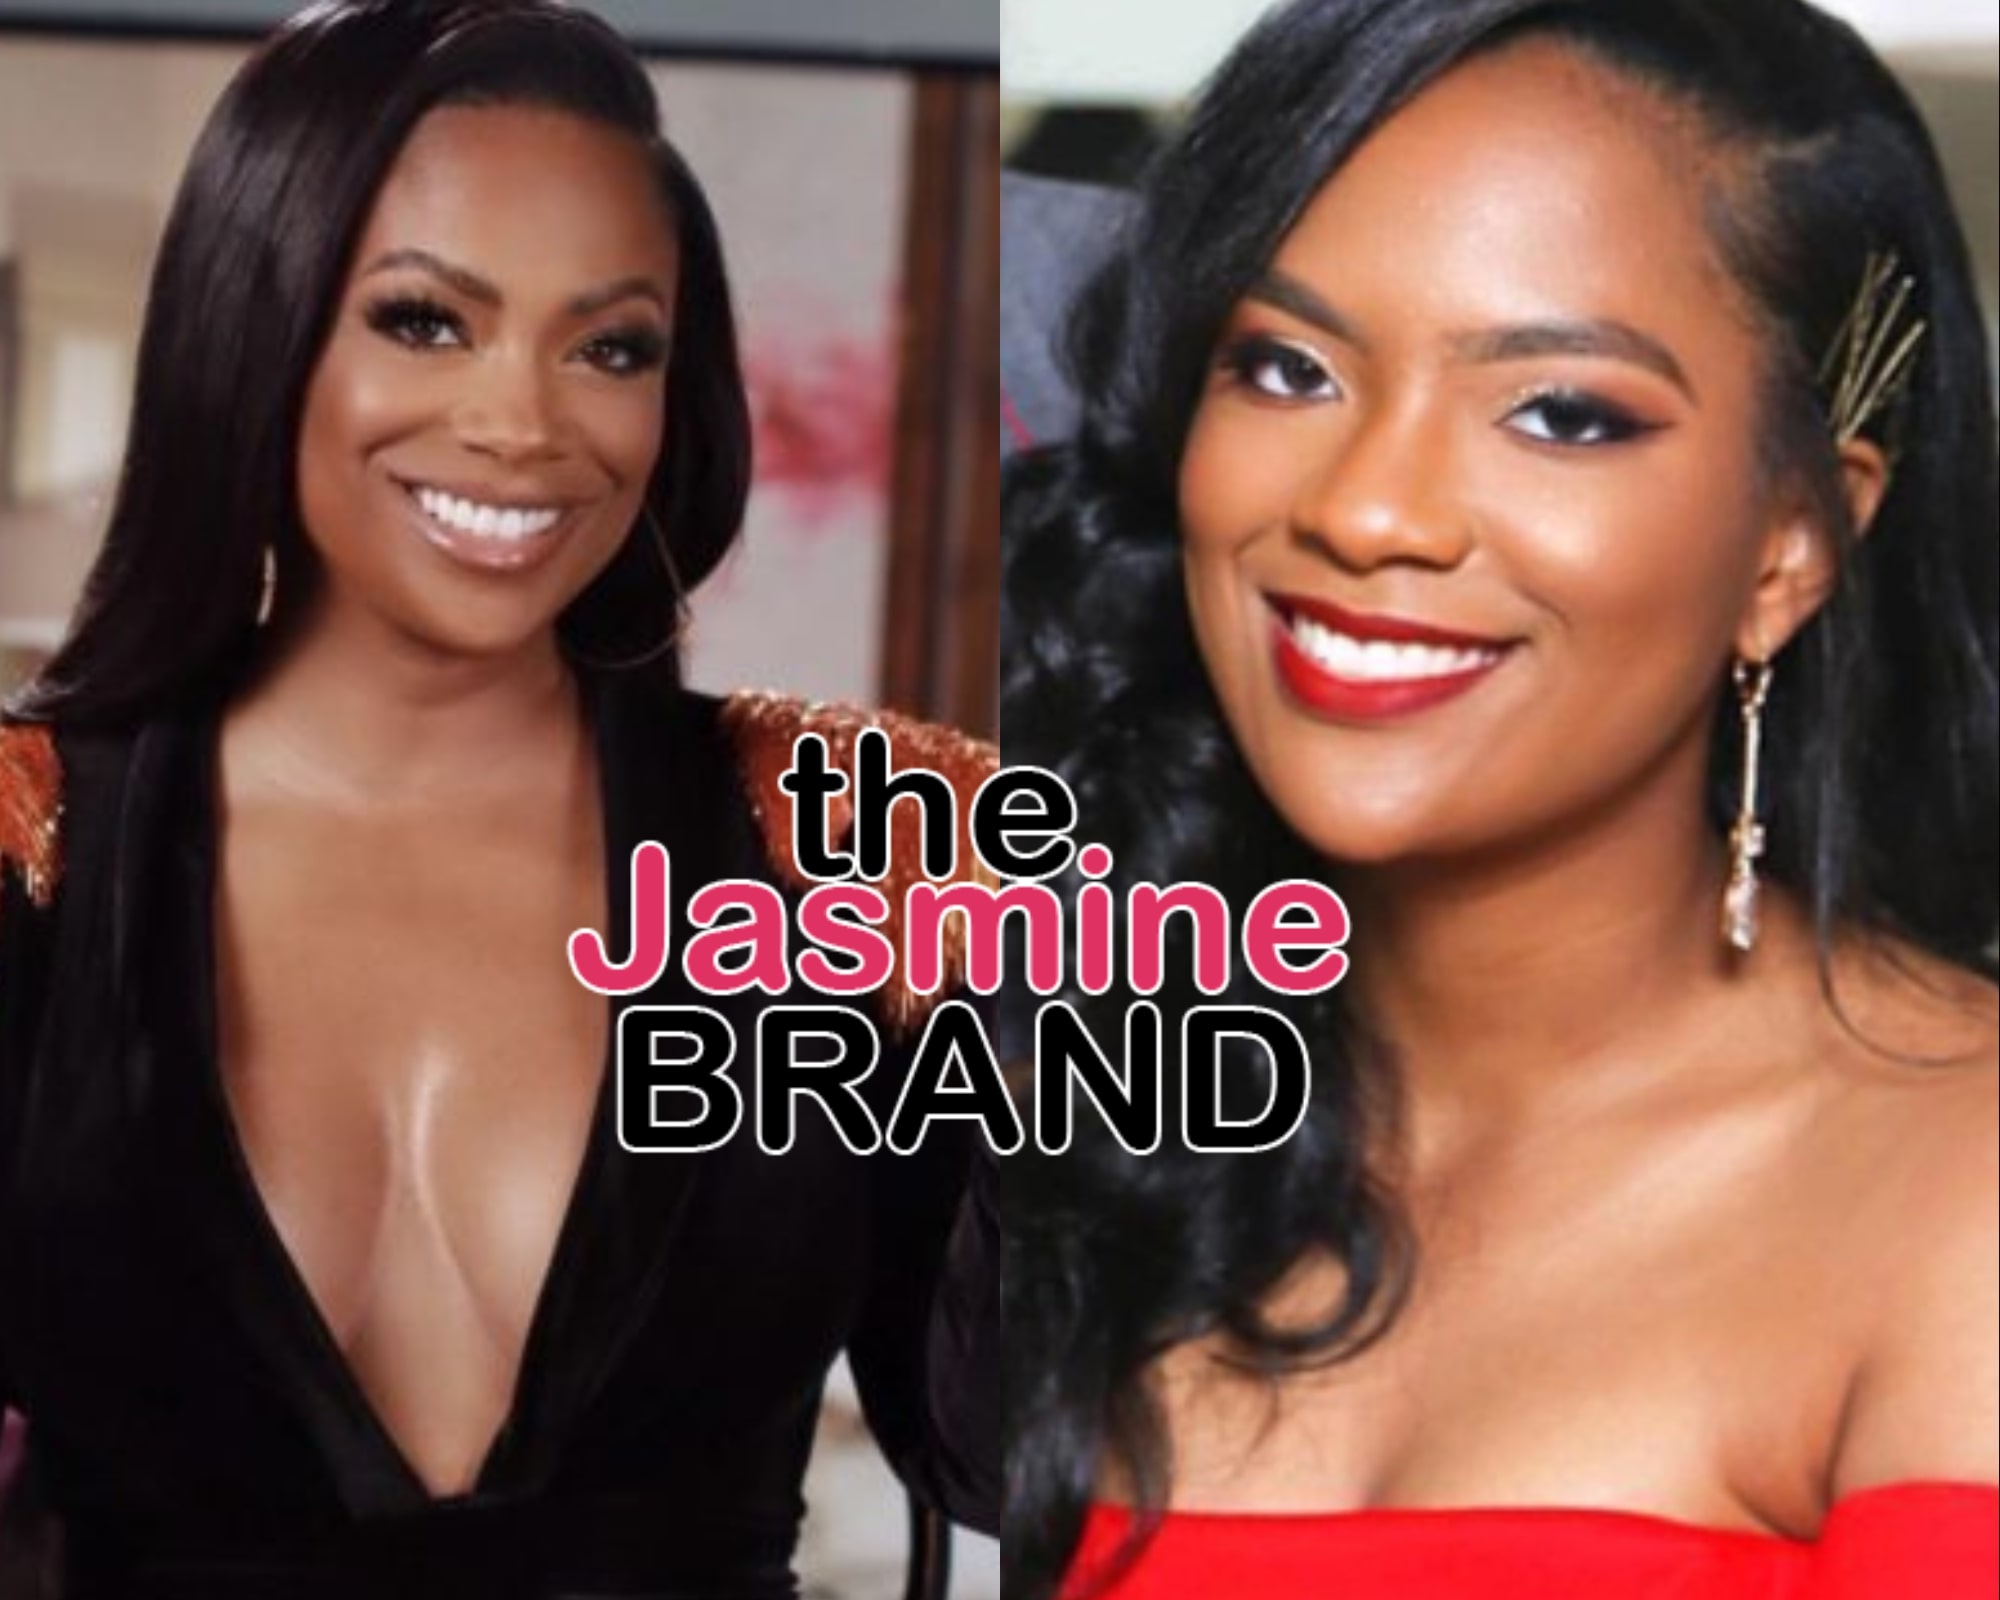 Riley Burruss Says Mom Kandi Burruss Can Now Focus On Her Goal Of Being An EGOT Winner Following Recent Departure From ‘RHOA’ After 14 Seasons: ‘Filming Reality TV Takes So Much Time & Commitment’